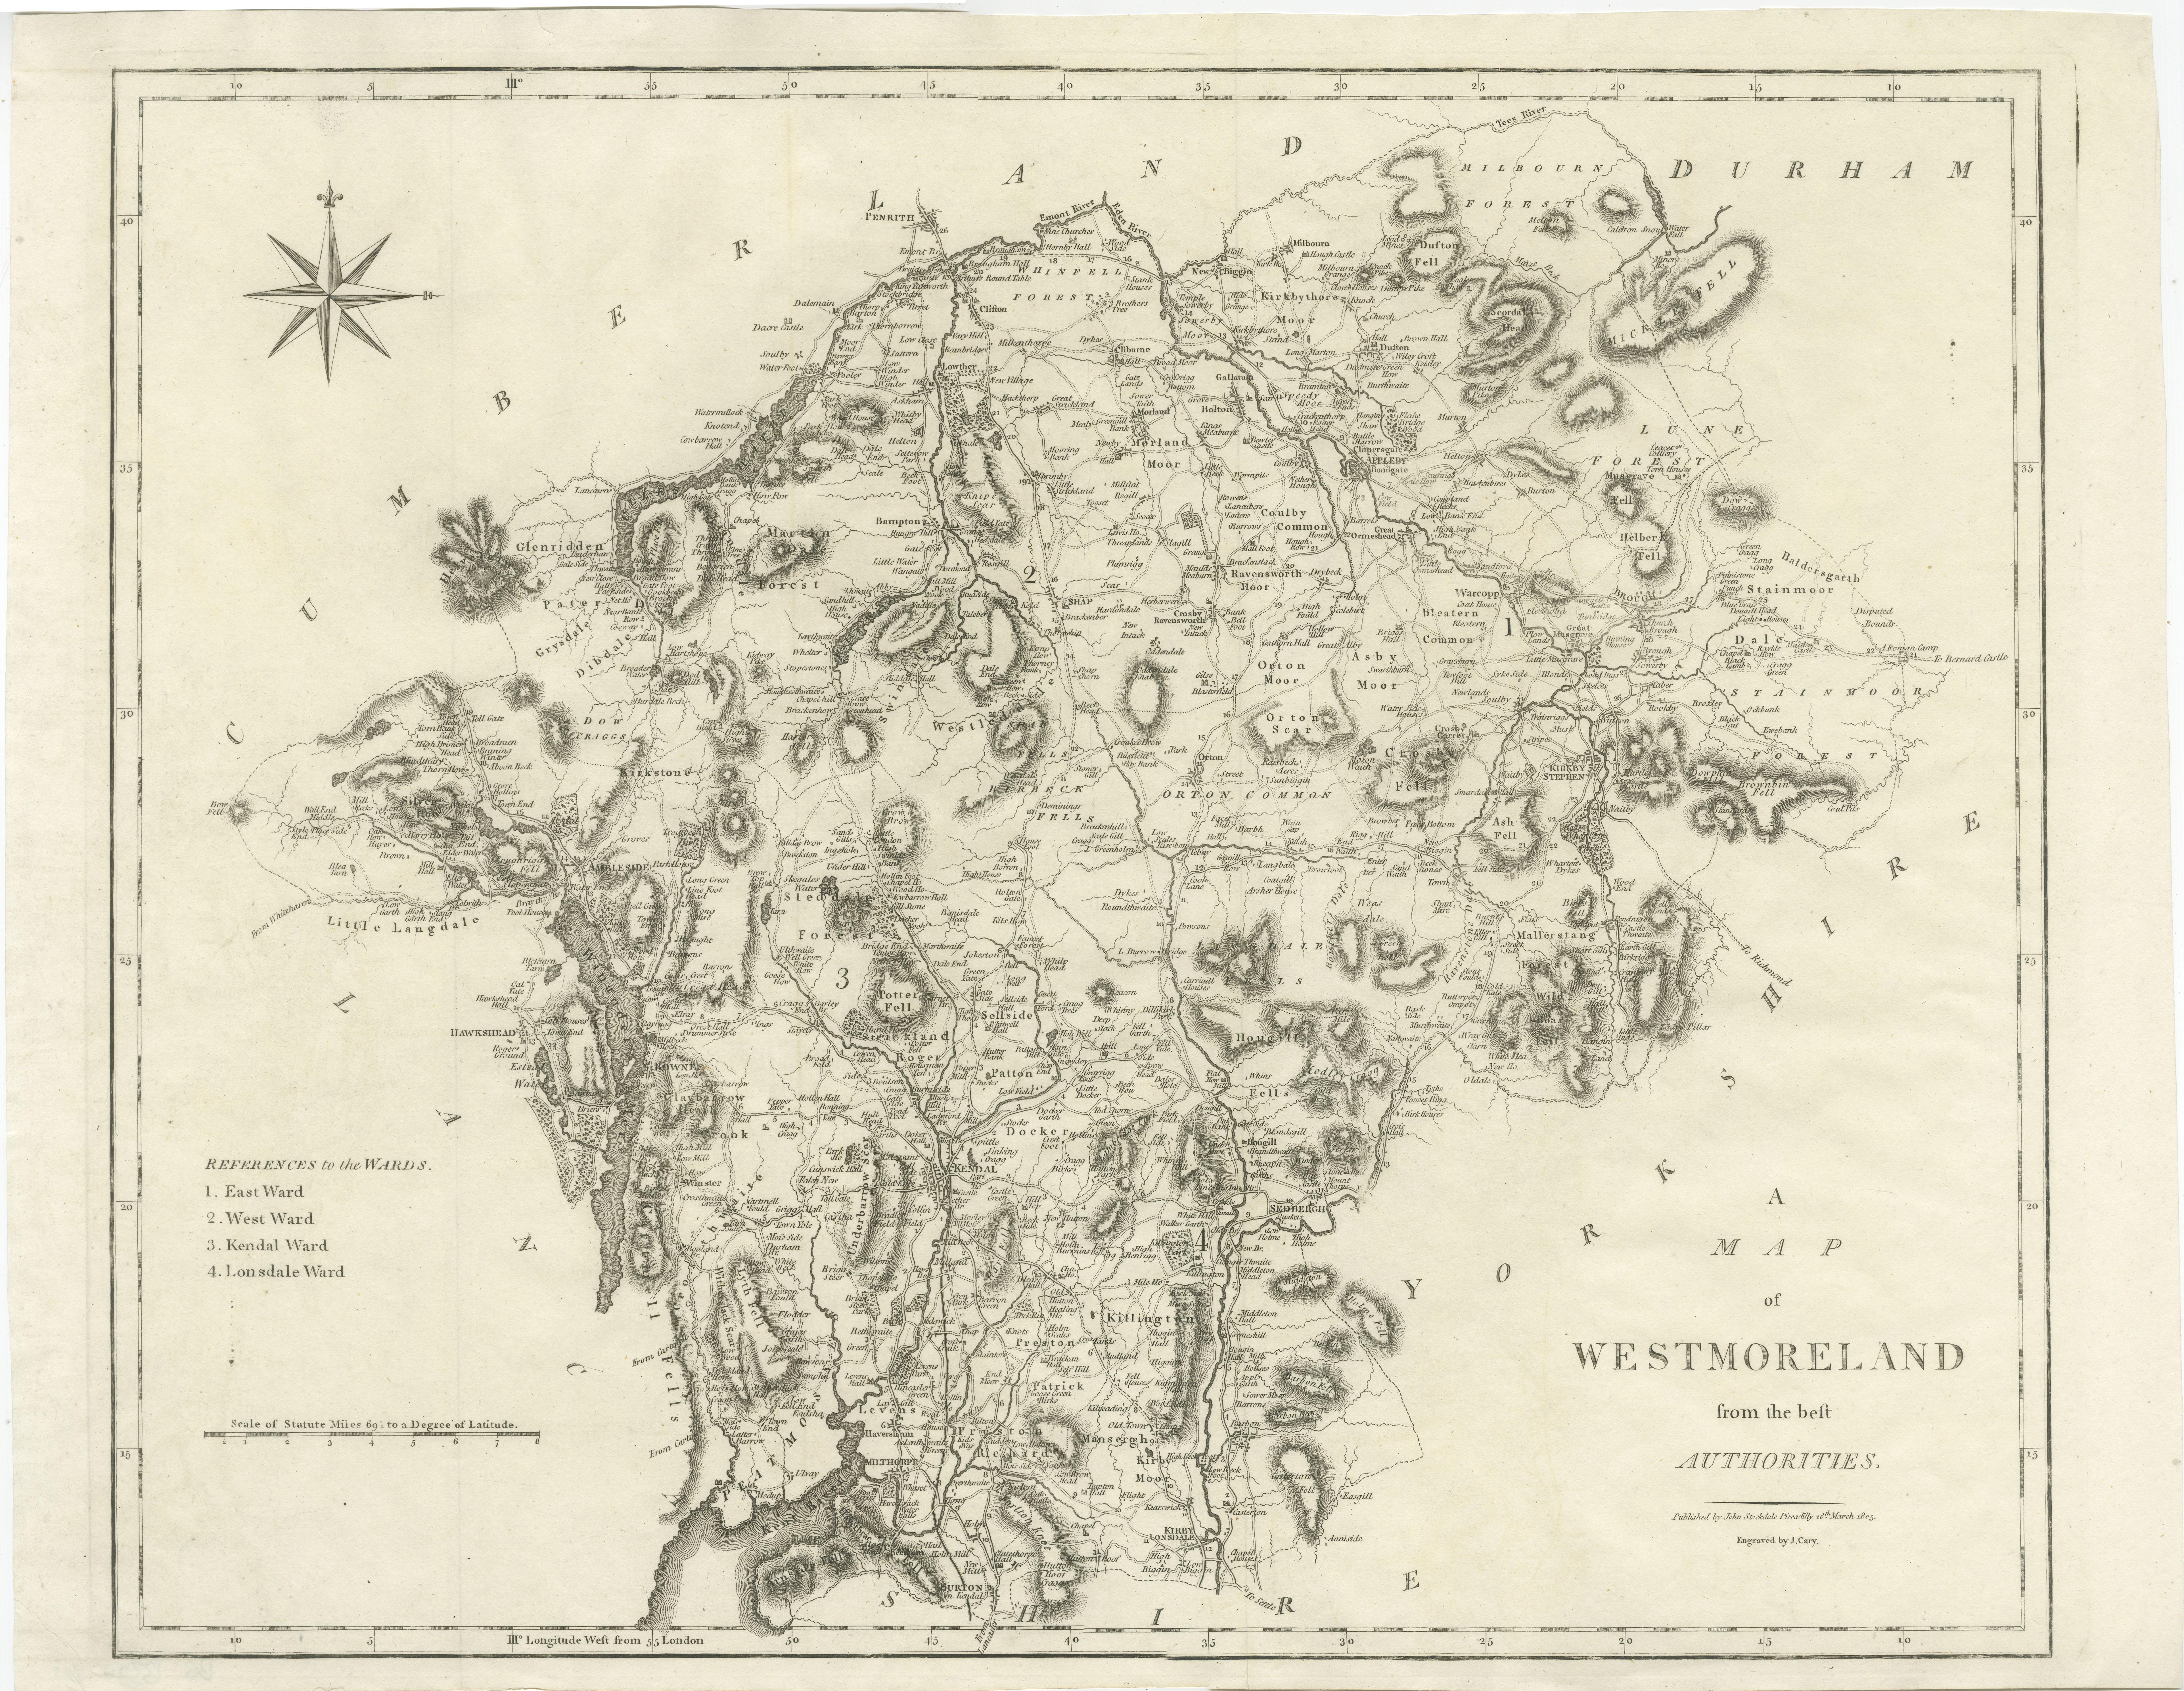 Antique map titled 'A Map of Westmoreland from the best Authorities'. Original old county map of Westmorland, England. Engraved by John Cary. Originates from 'New British Atlas' by John Stockdale, published 1805. 

John Cary (1755-1835) was a